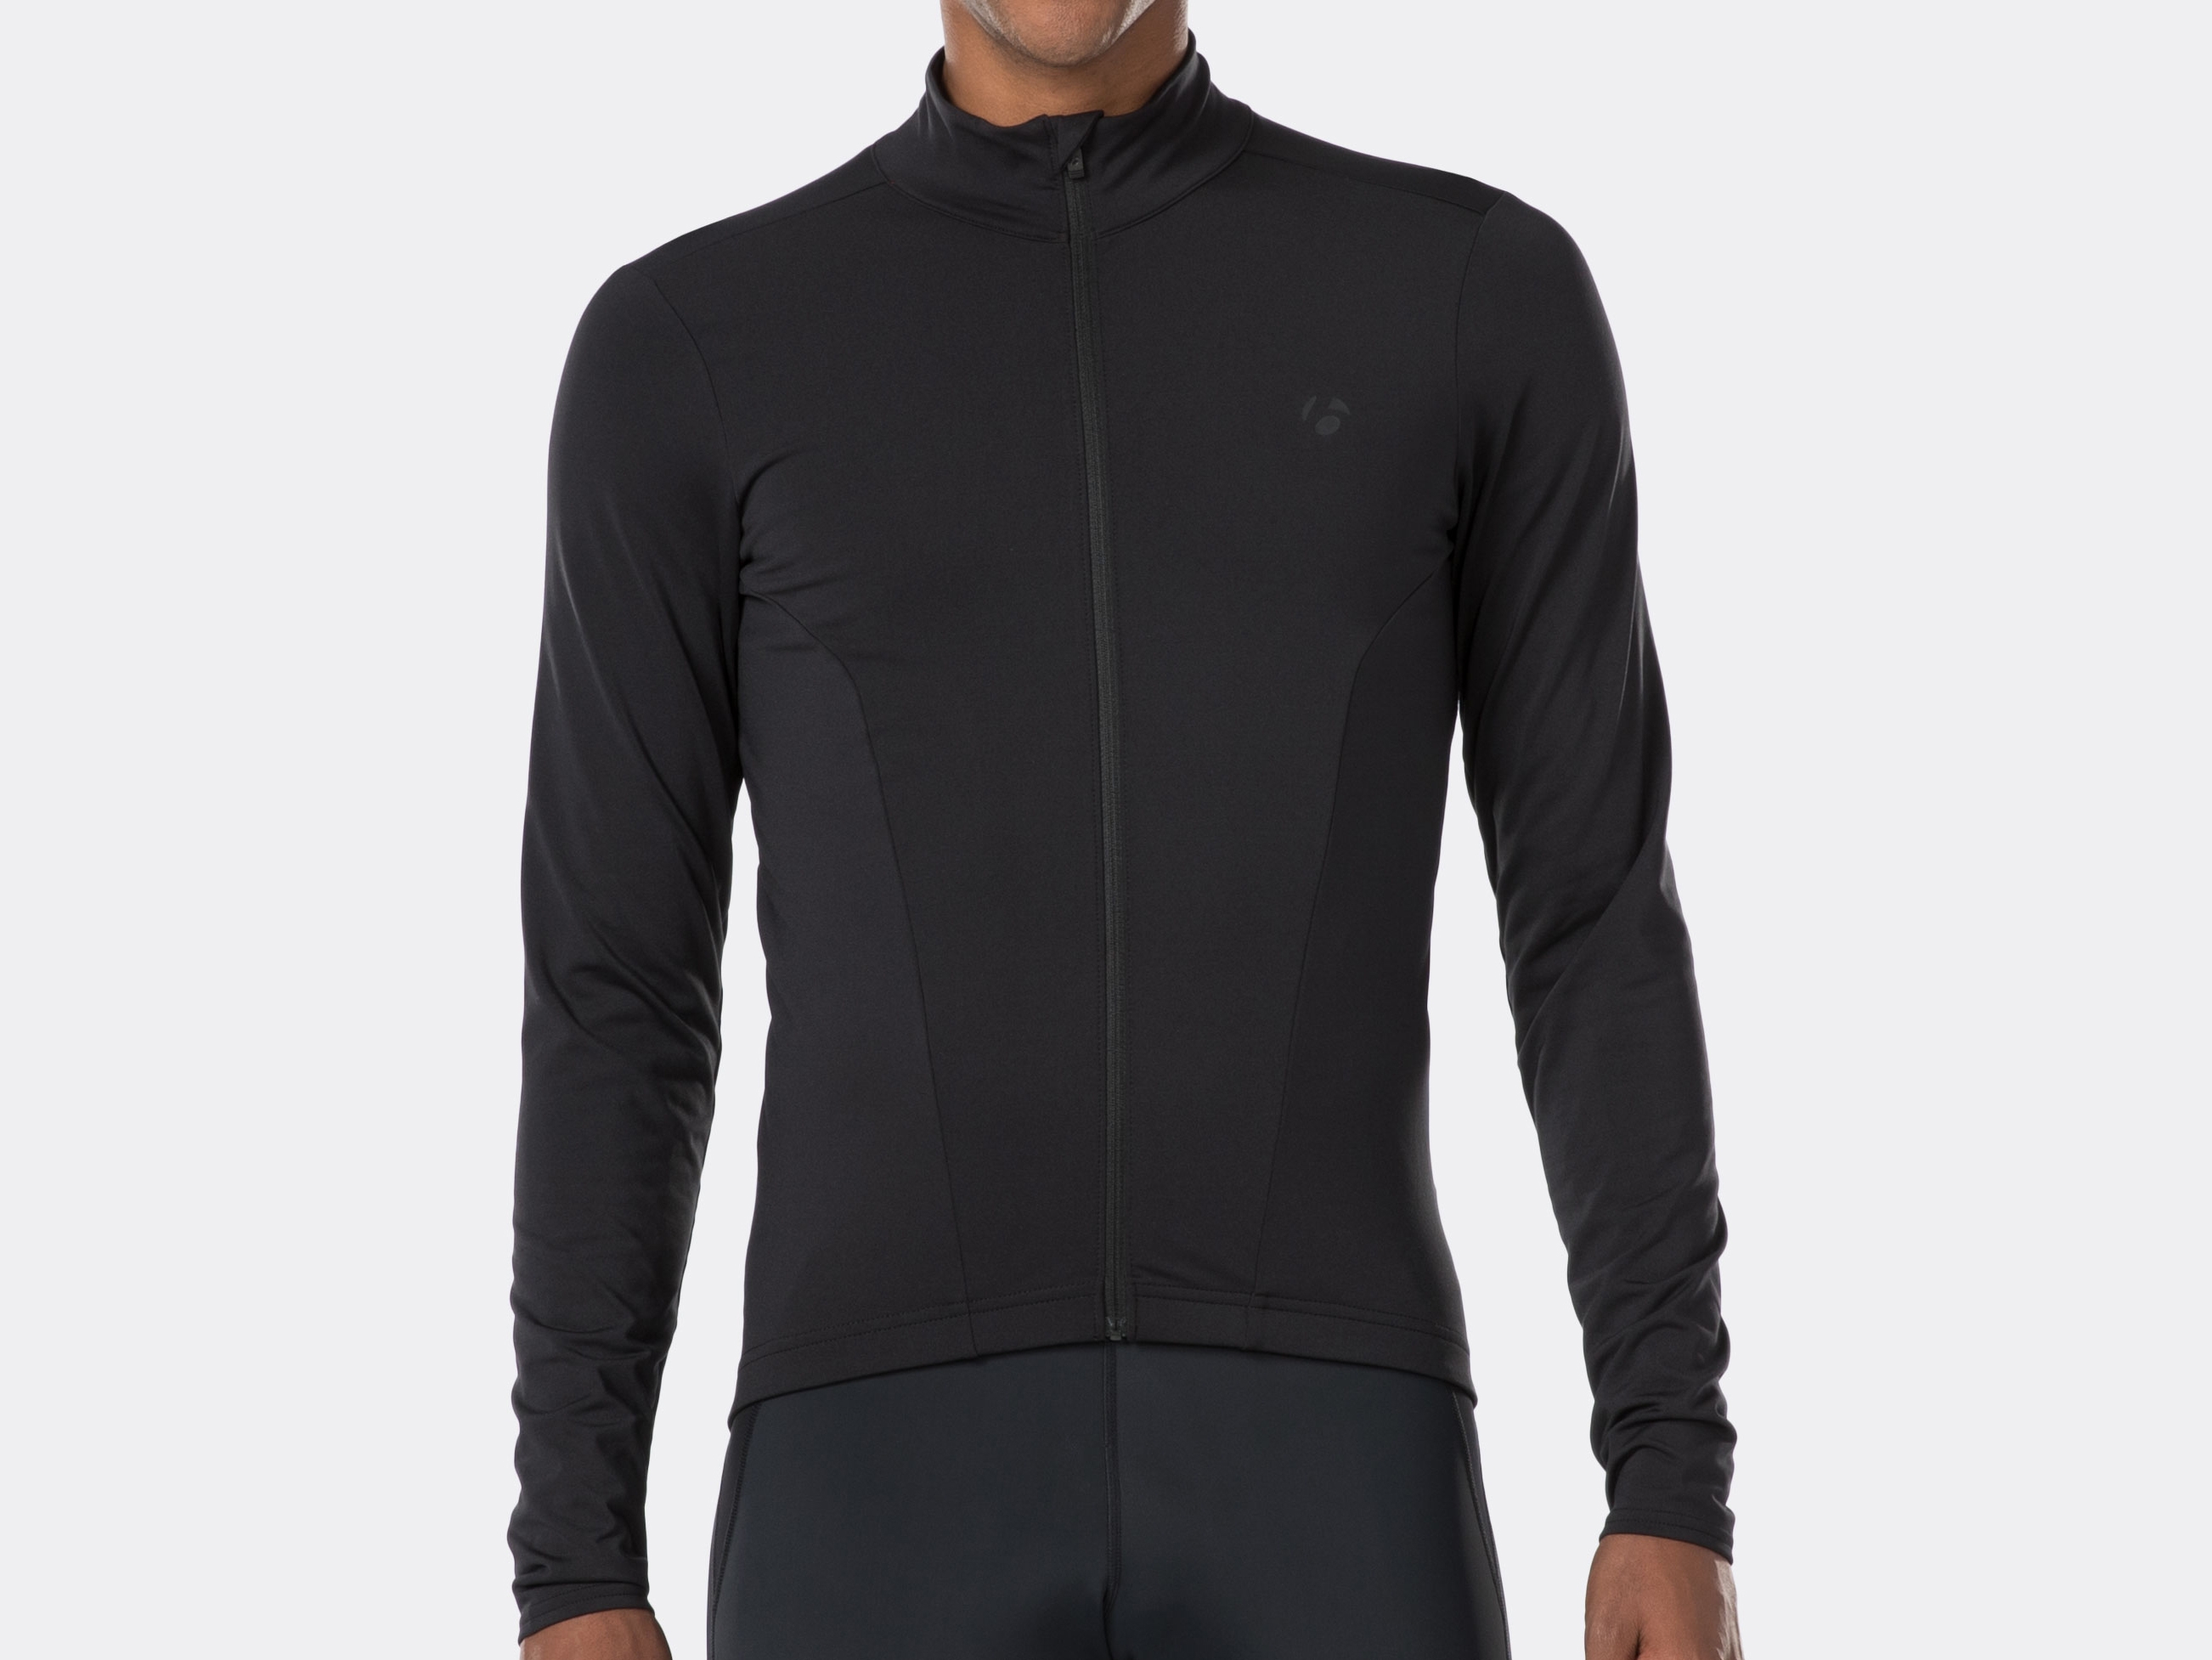 Bontrager Velocis Thermal Long Sleeve 